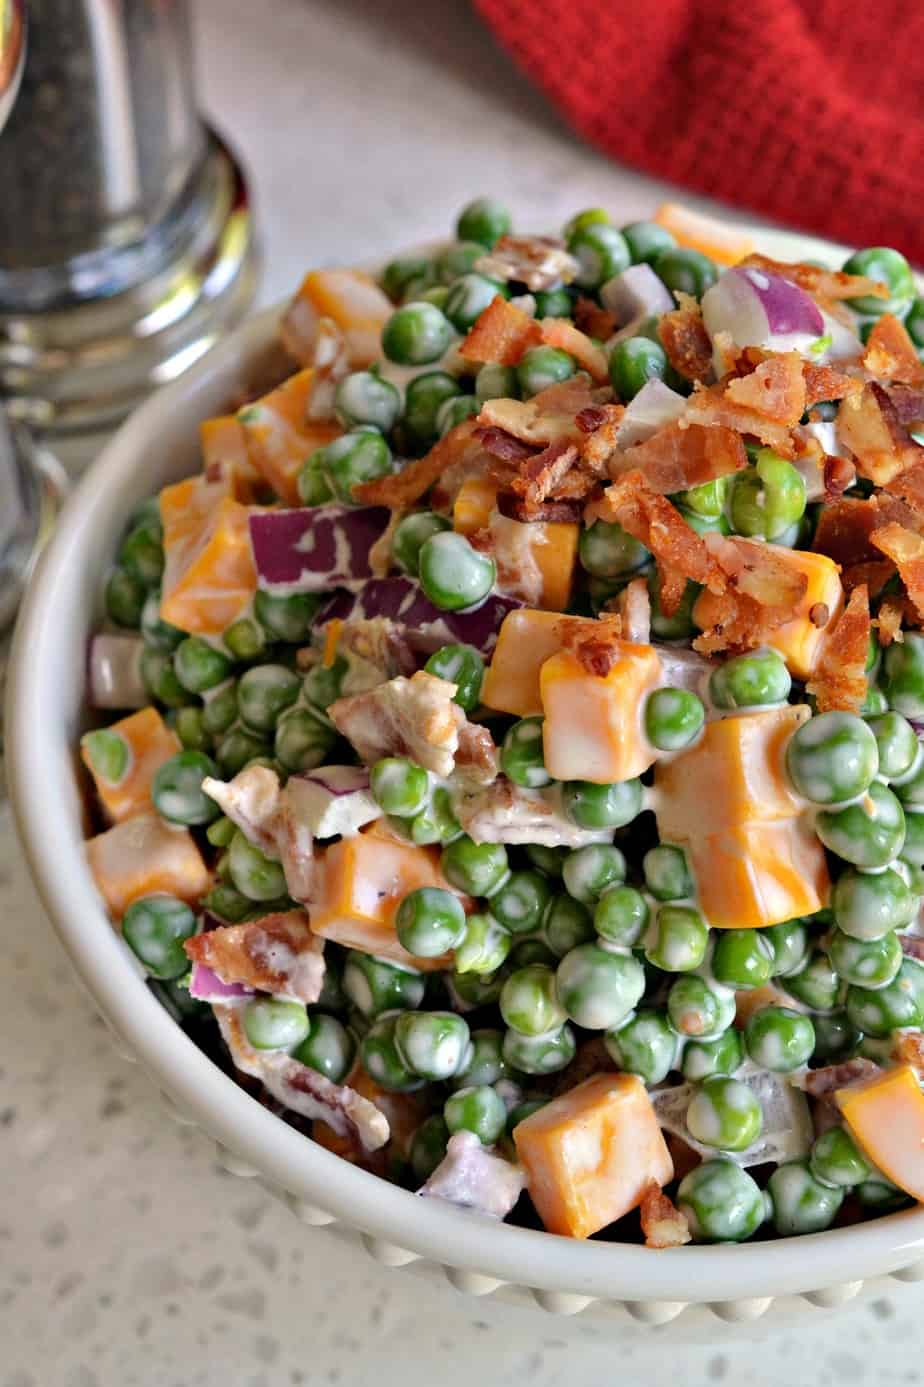 This delectable creamy pea salad comes together in less than ten minutes and is a favorite at family reunions, potlucks and picnics.